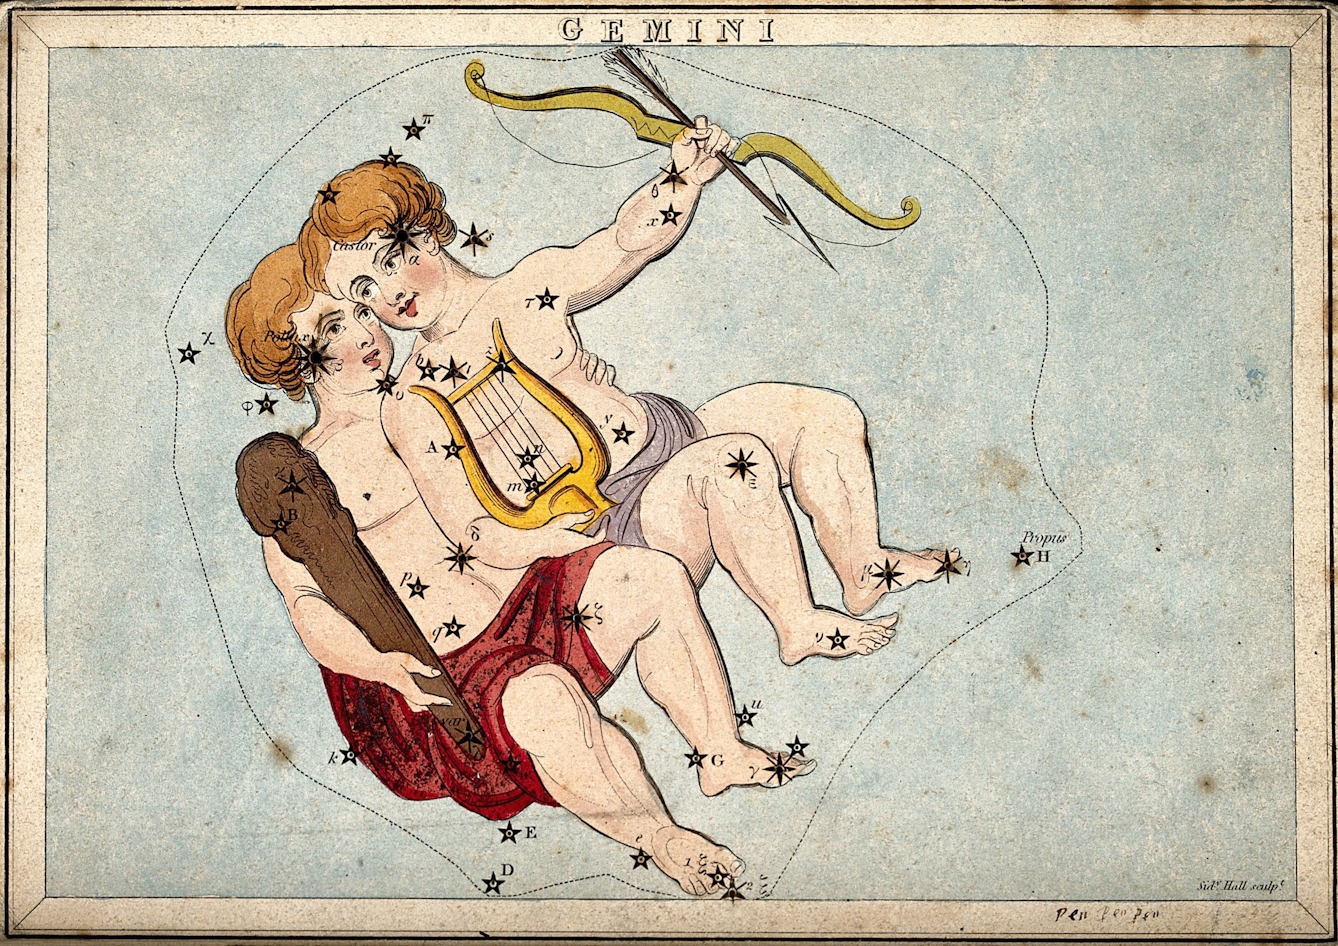 Coloured print of the constellation of Gemini showing the stars superimposed on a the image of a pair of identical young twin boys with redish hair and white skin. One boy holds a bow and arrow in one hand and a lyre in the othr. The other boy holds a large wooden club in one hand and has other arm around his brother